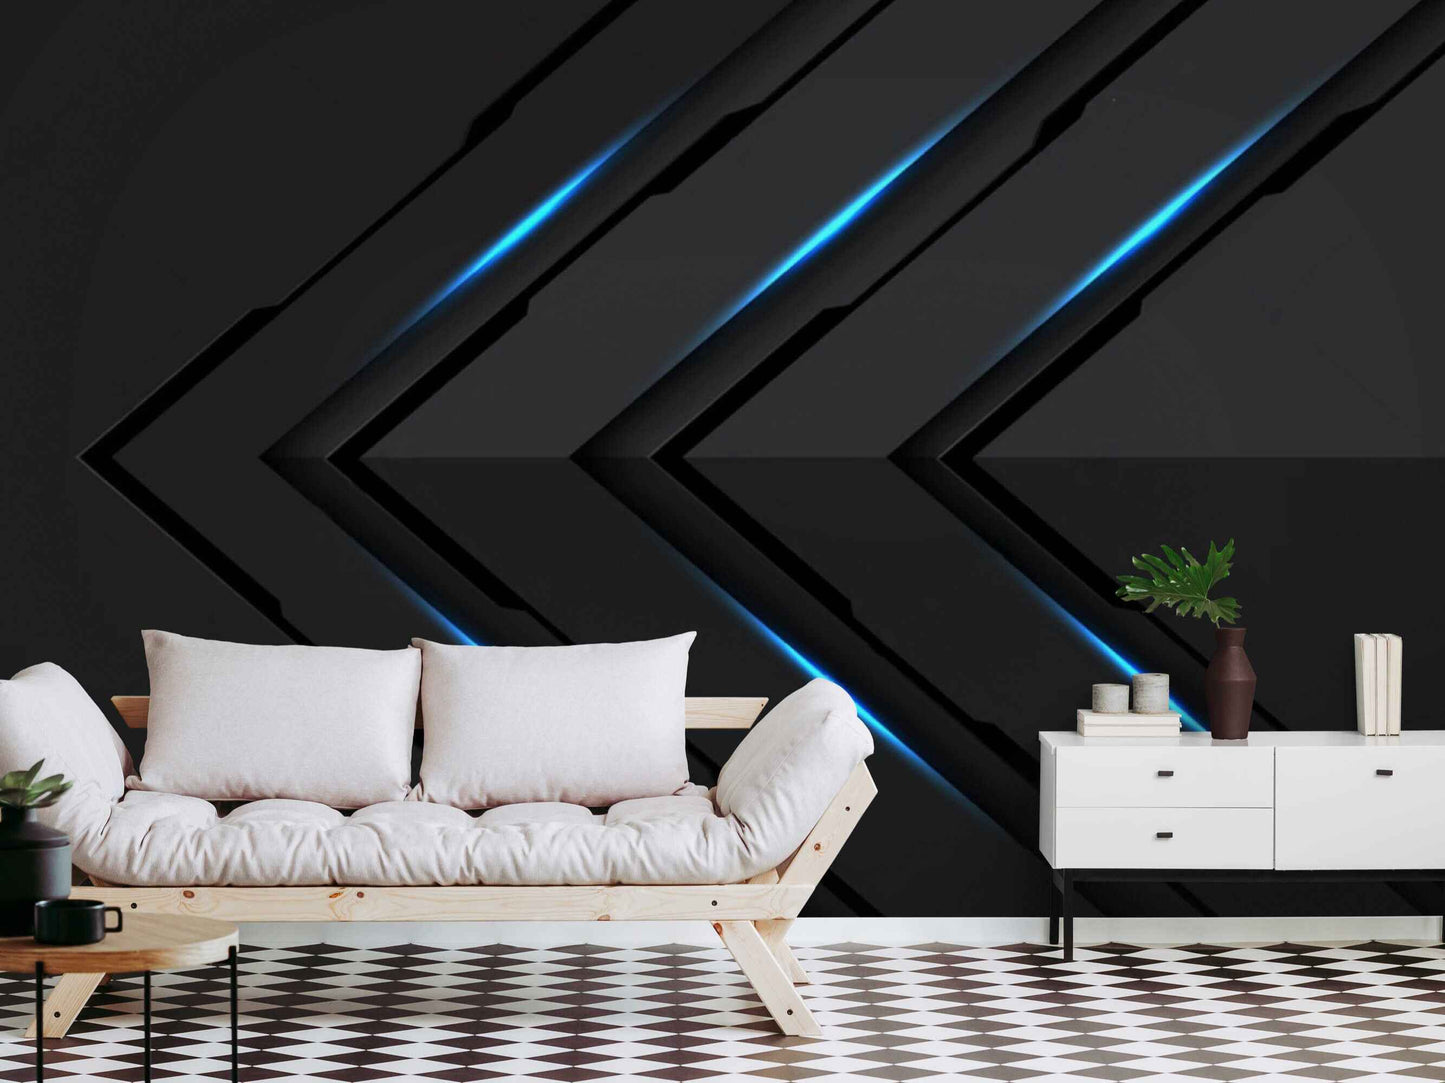 Sleek cyber wallpaper mural, infusing the space with high-tech aesthetics.